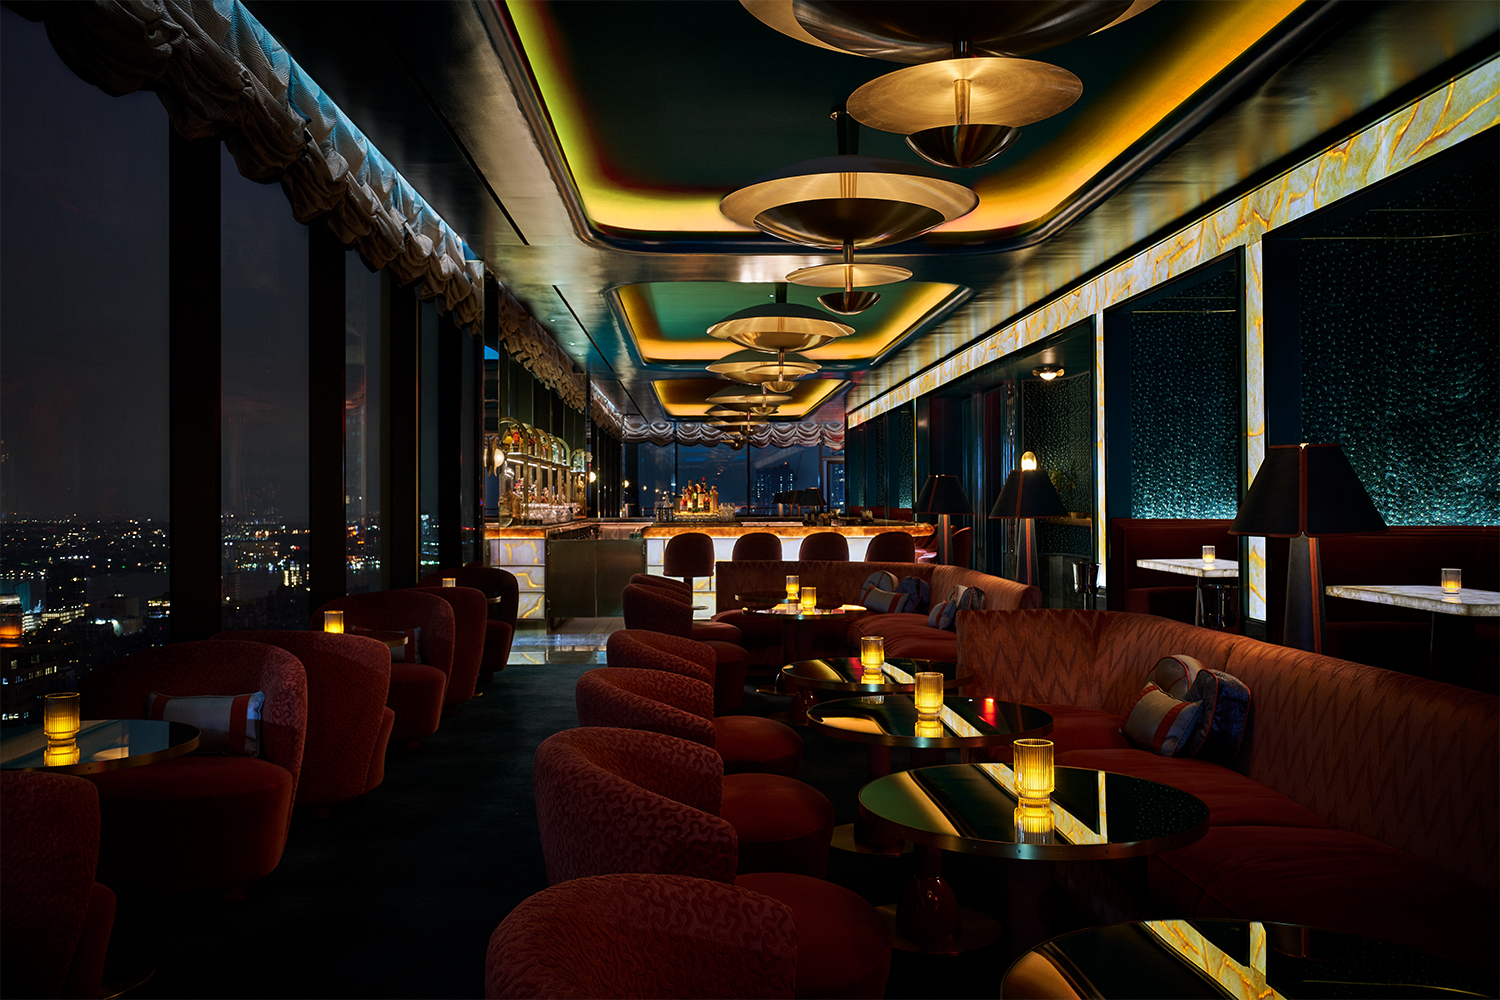 The inside of Nubeluz, the rooftop bar at The Ritz-Carlton New York, NoMad, shown at night